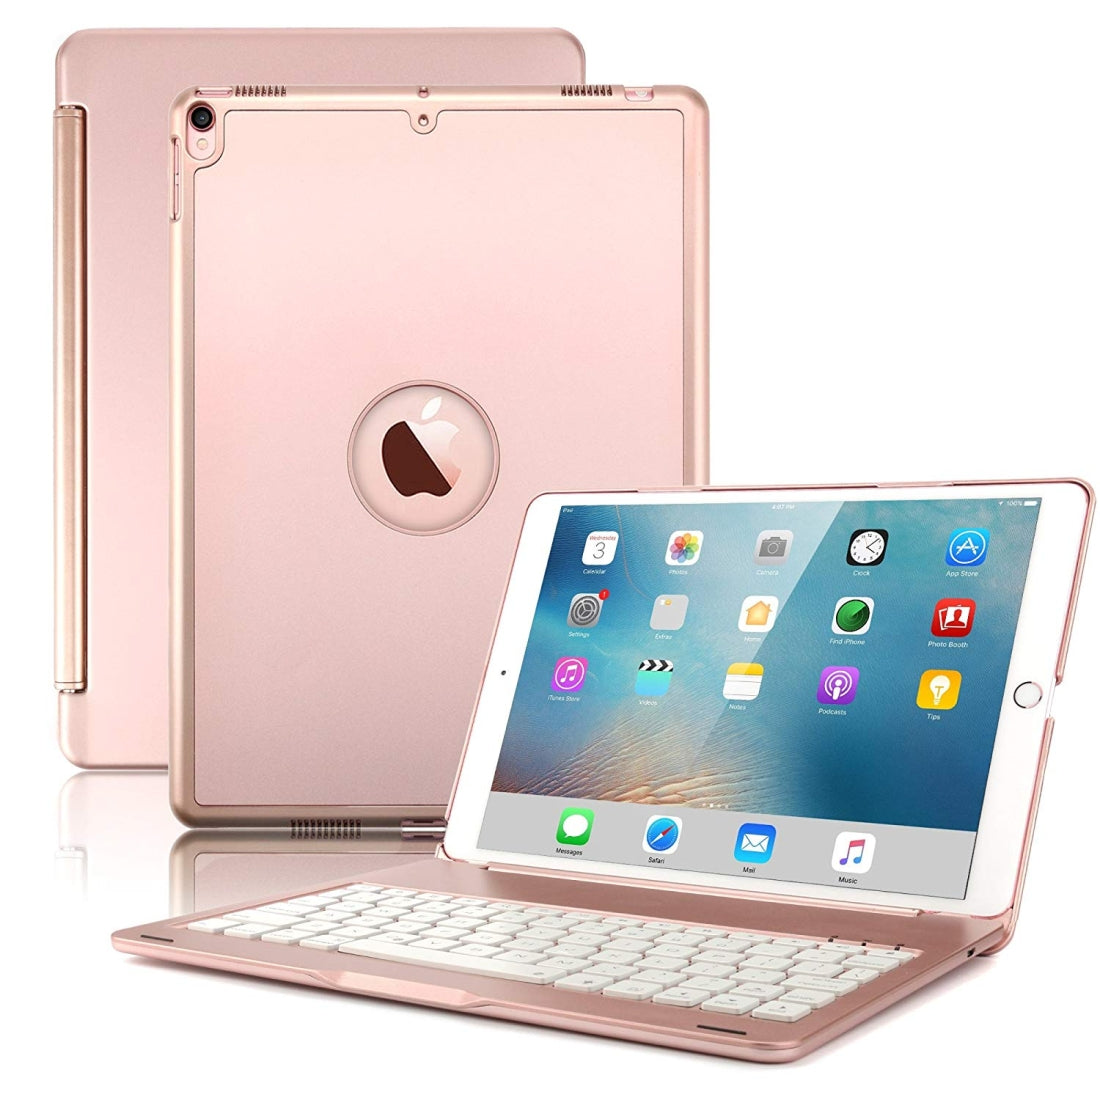 F105 Aluminum Alloy 7 Backlight iPad Case Hard Shell for iPad Pro 10.5 inch A1701 (2017) / A1709 (2017), with keyboard & bracket(Rose Gold)